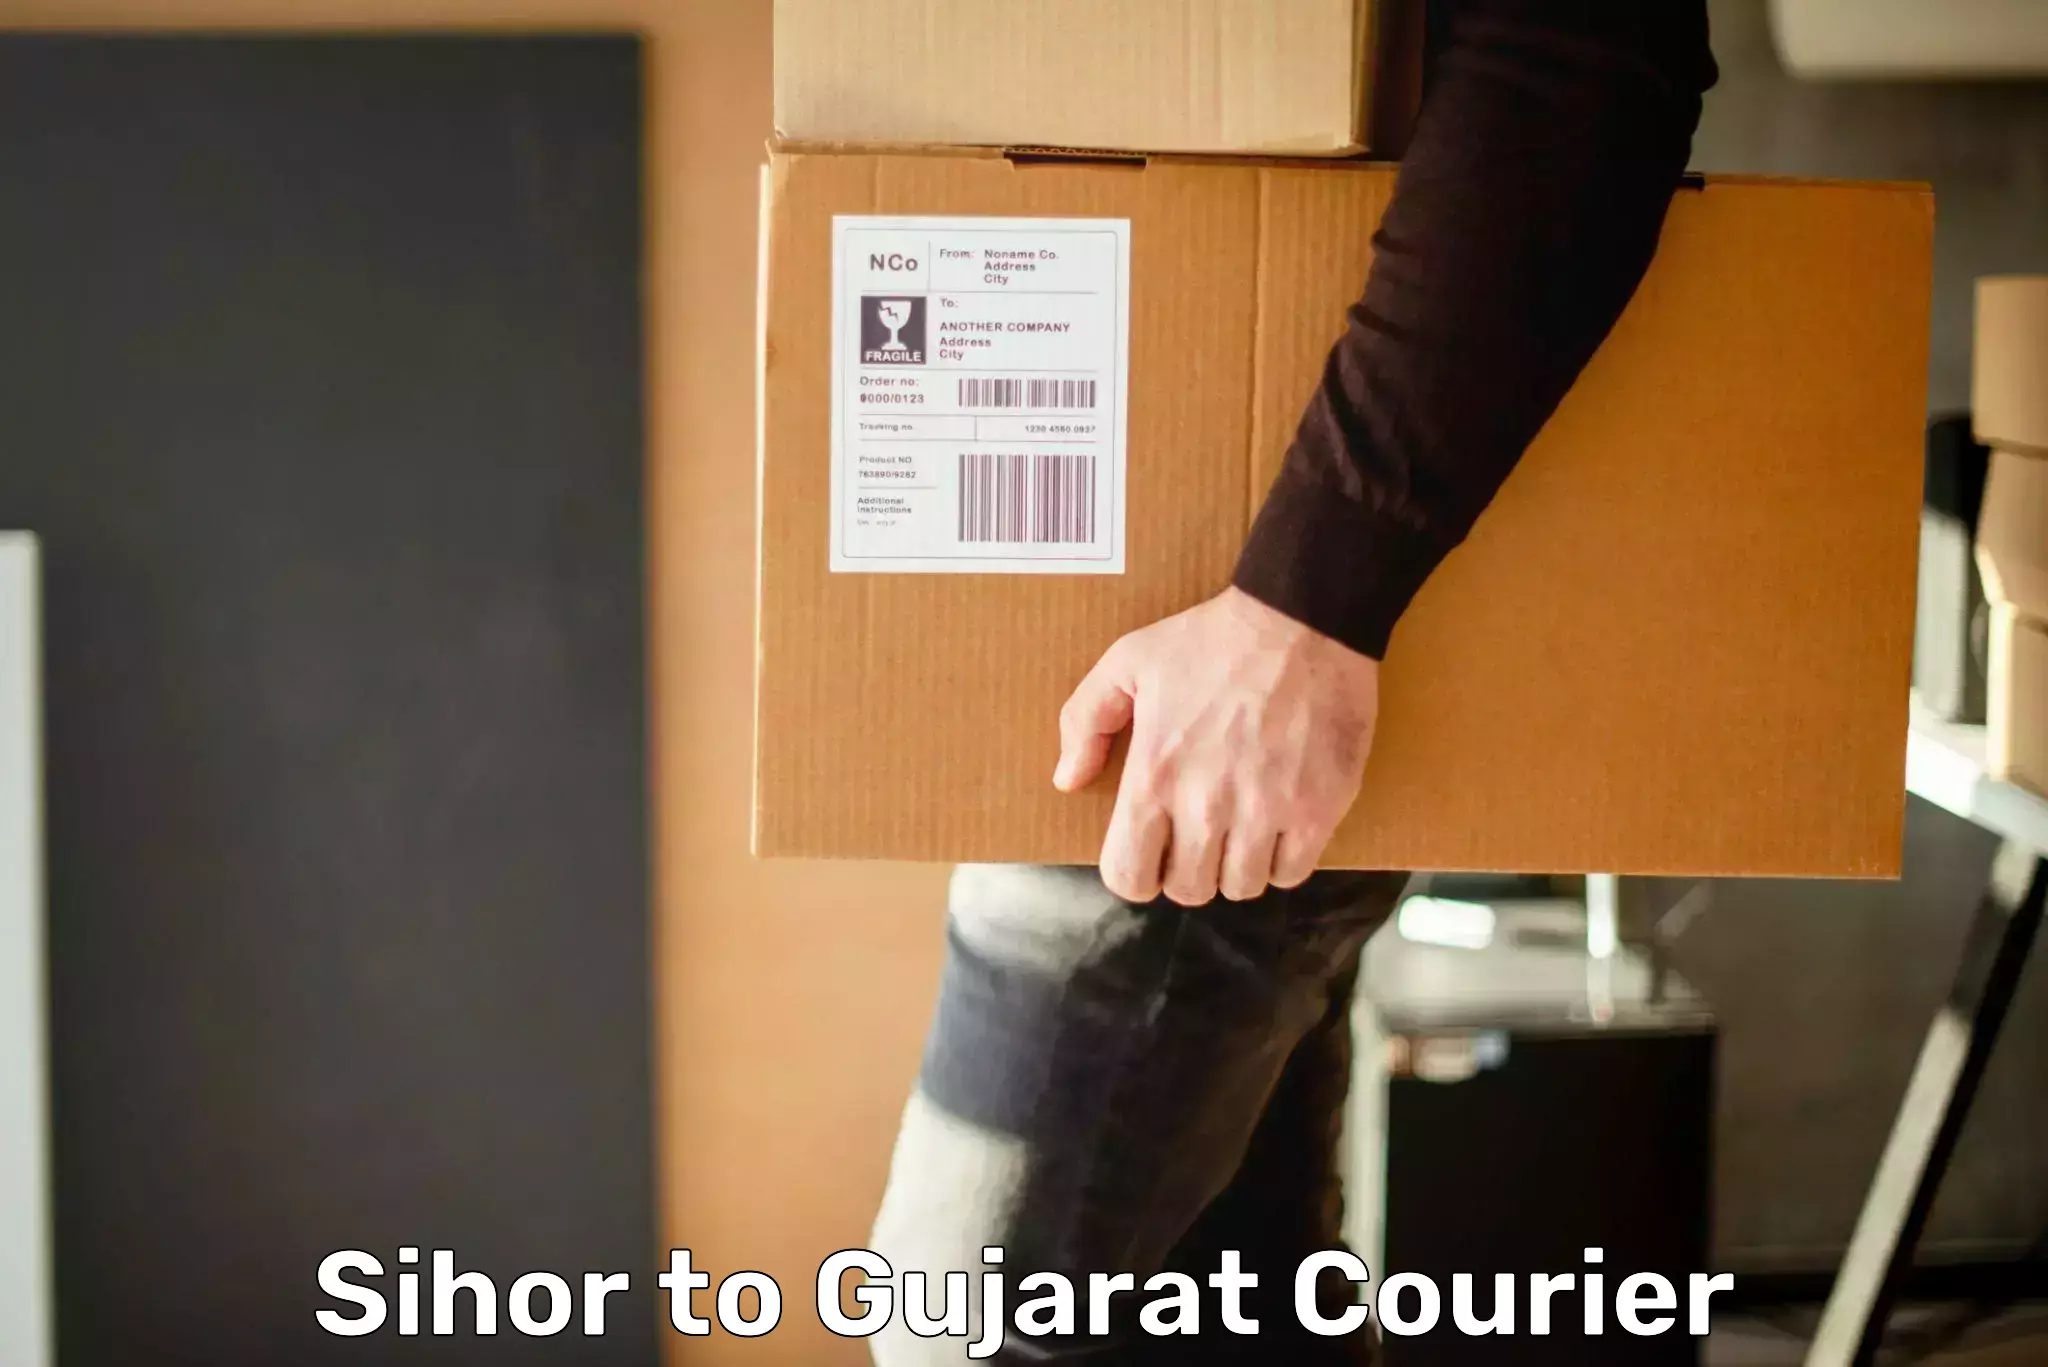 Advanced shipping technology in Sihor to Rajkot